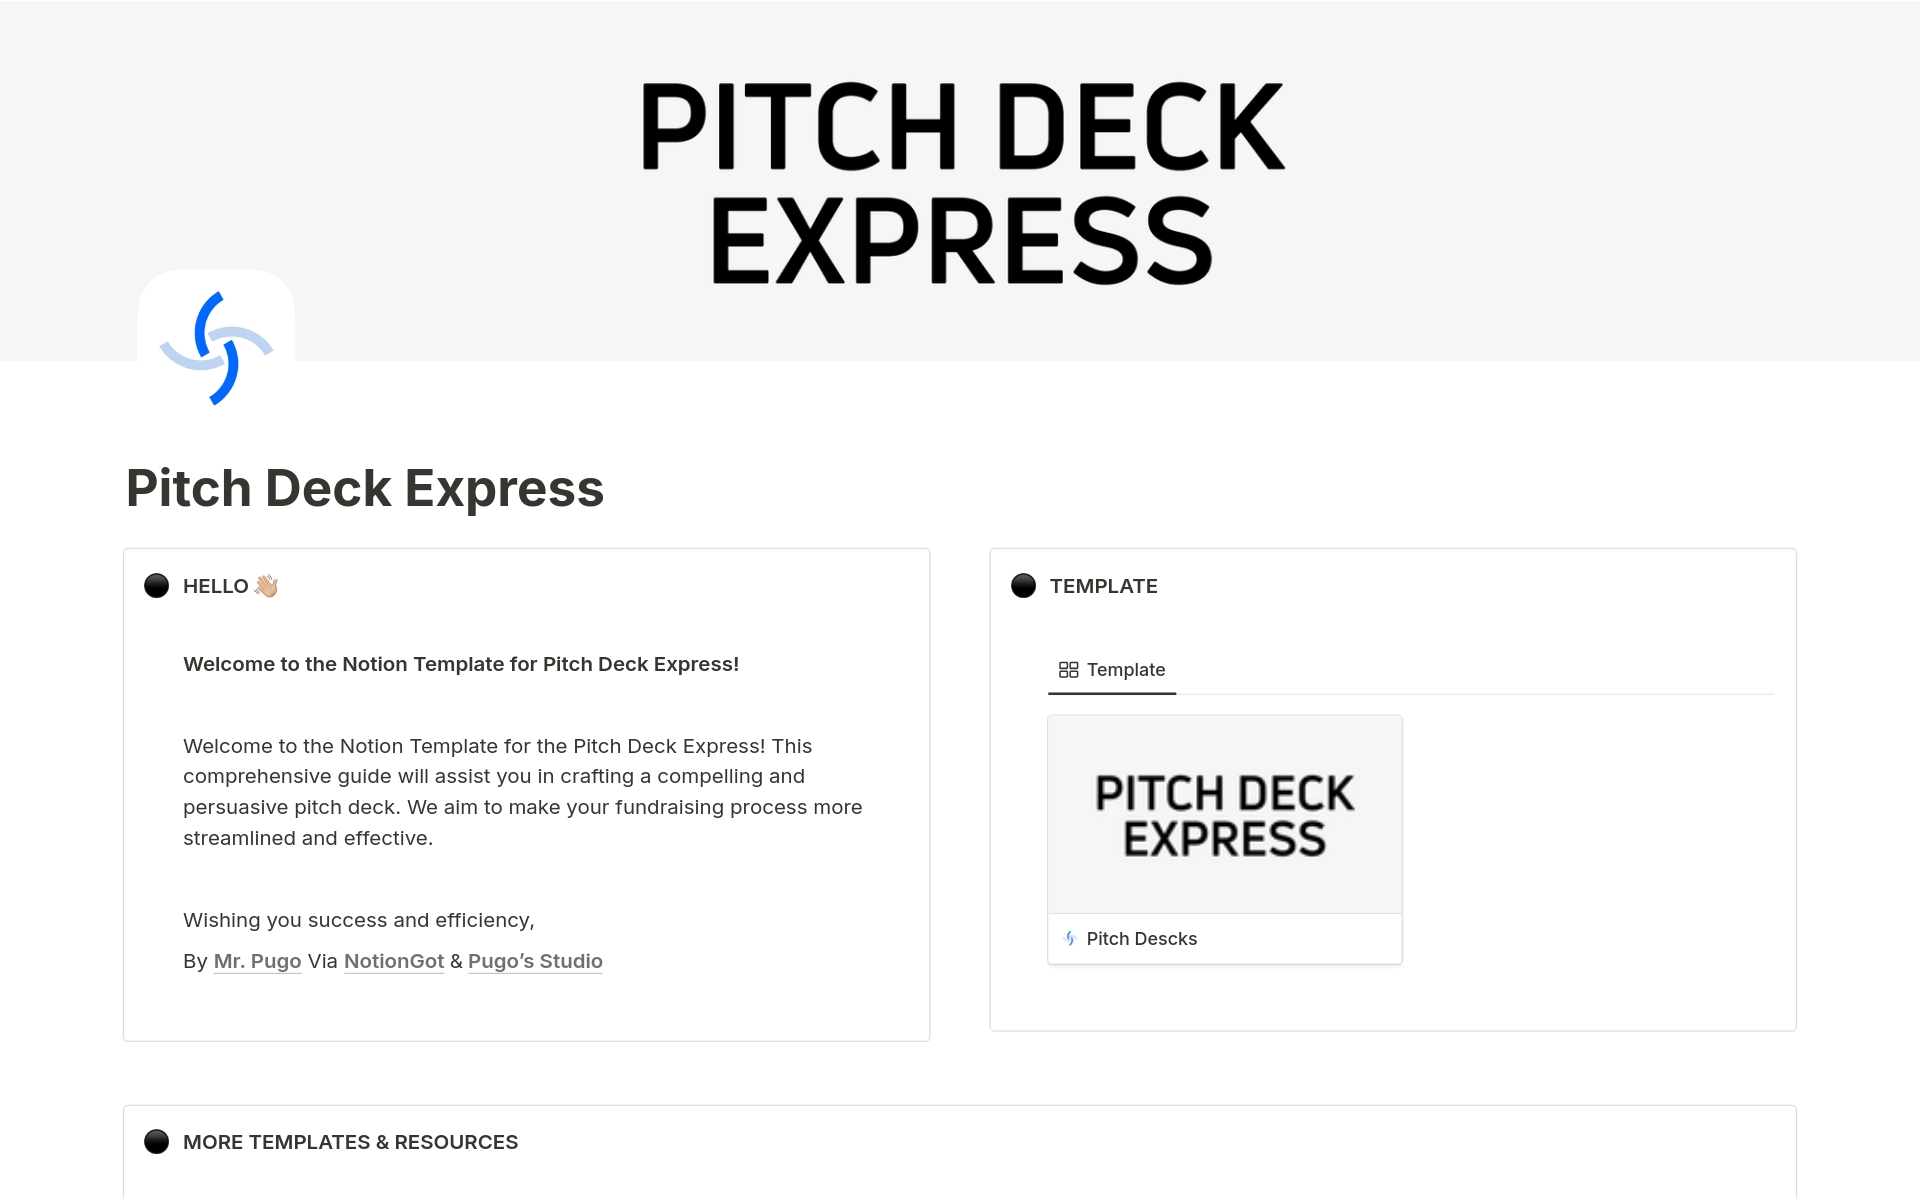 Do you find yourself struggling to create a captivating pitch deck for your startup or business?